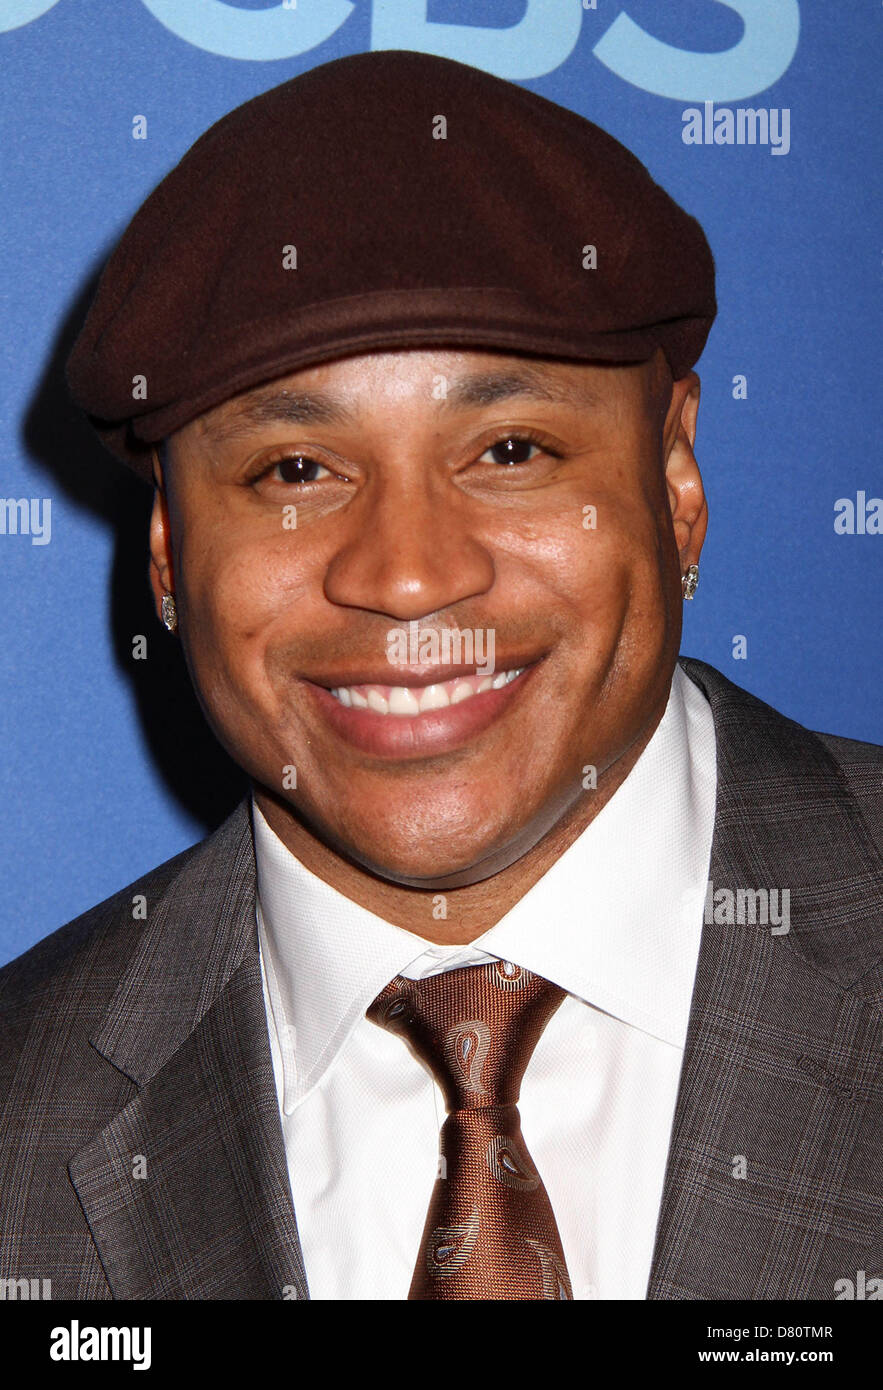 New York, USA. 15th May 2013. Actor/hip hop artist LL COOL J attends the 2013 CBS upfront held at the Tents at Lincoln Center. (Credit Image: Credit:  Nancy Kaszerman/ZUMAPRESS.com/Alamy Live News) Stock Photo